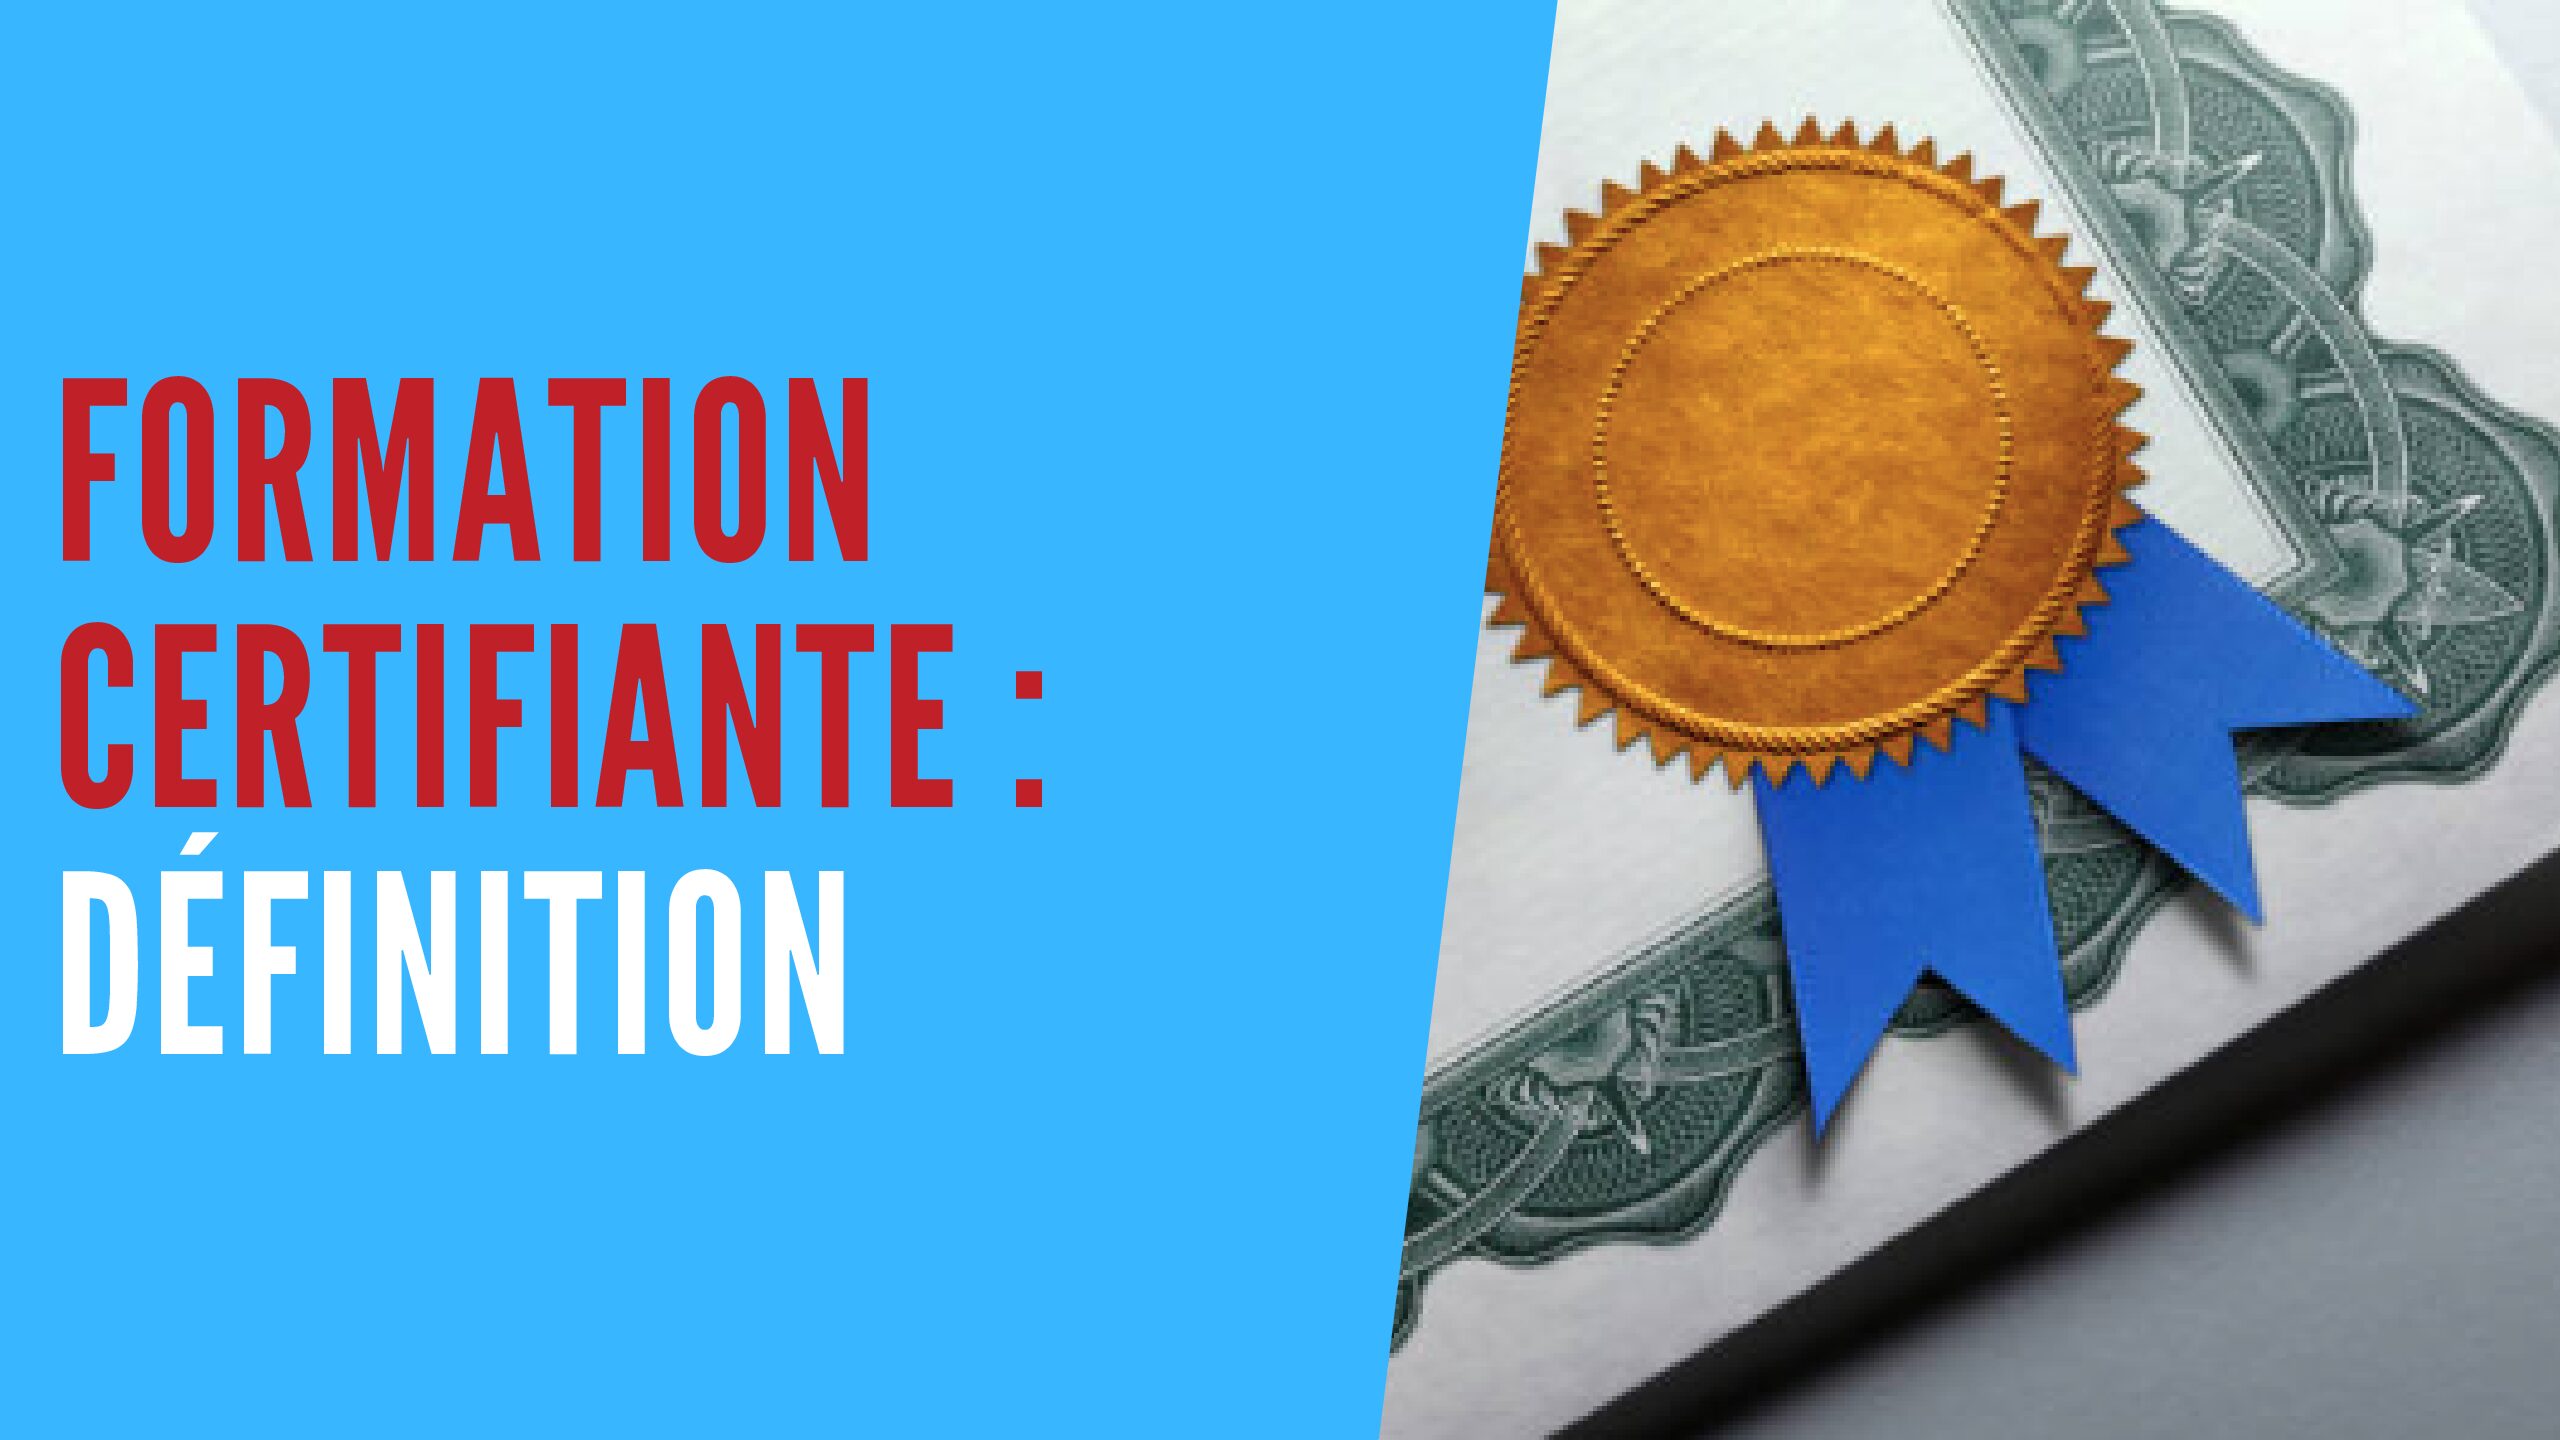 You are currently viewing Formation certifiante : définition